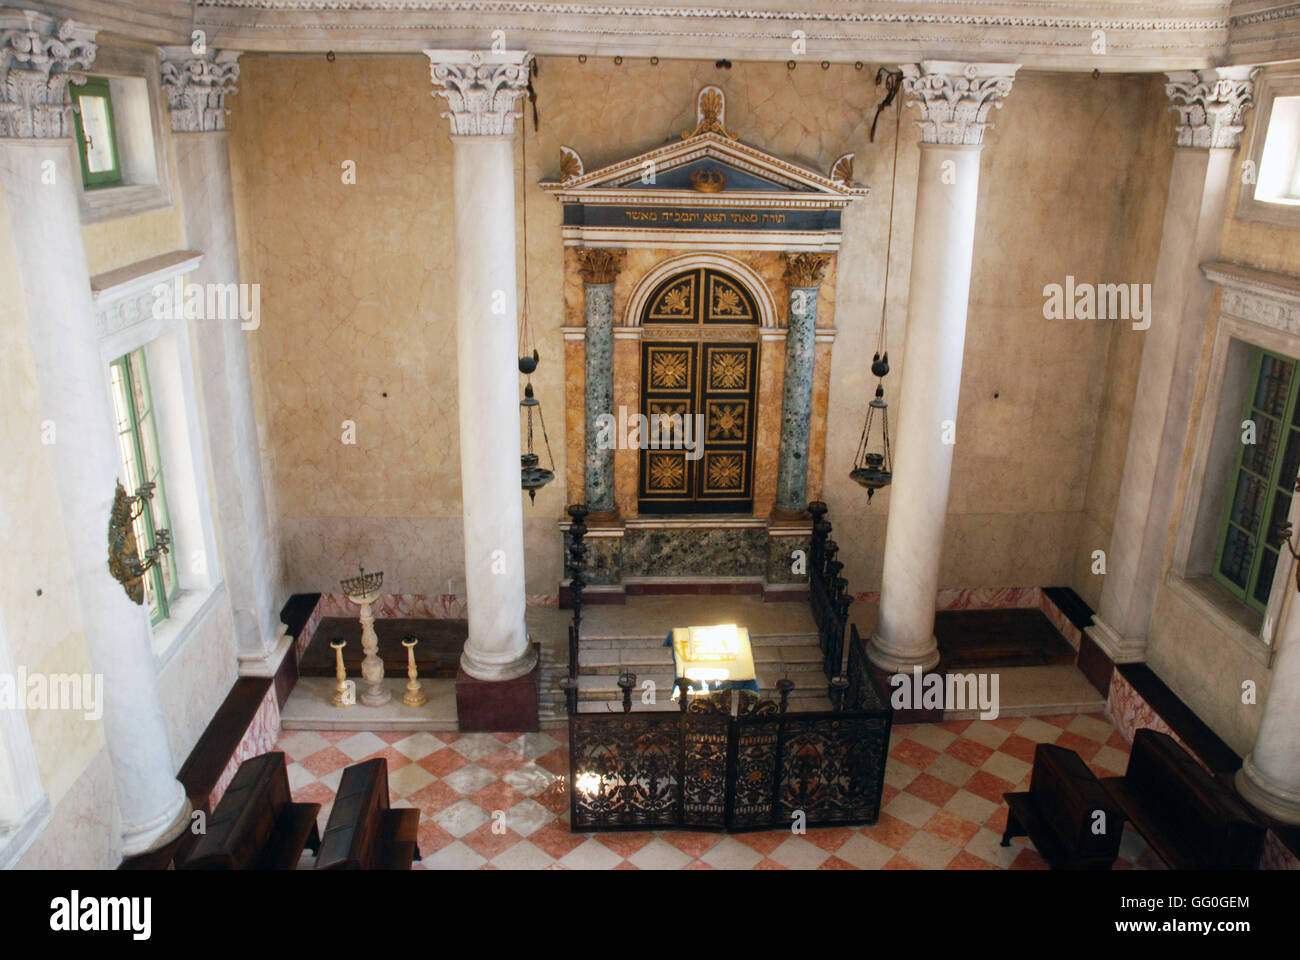 5622.Sobionetta synagogue, Italy. Built in 1824 Stock Photo